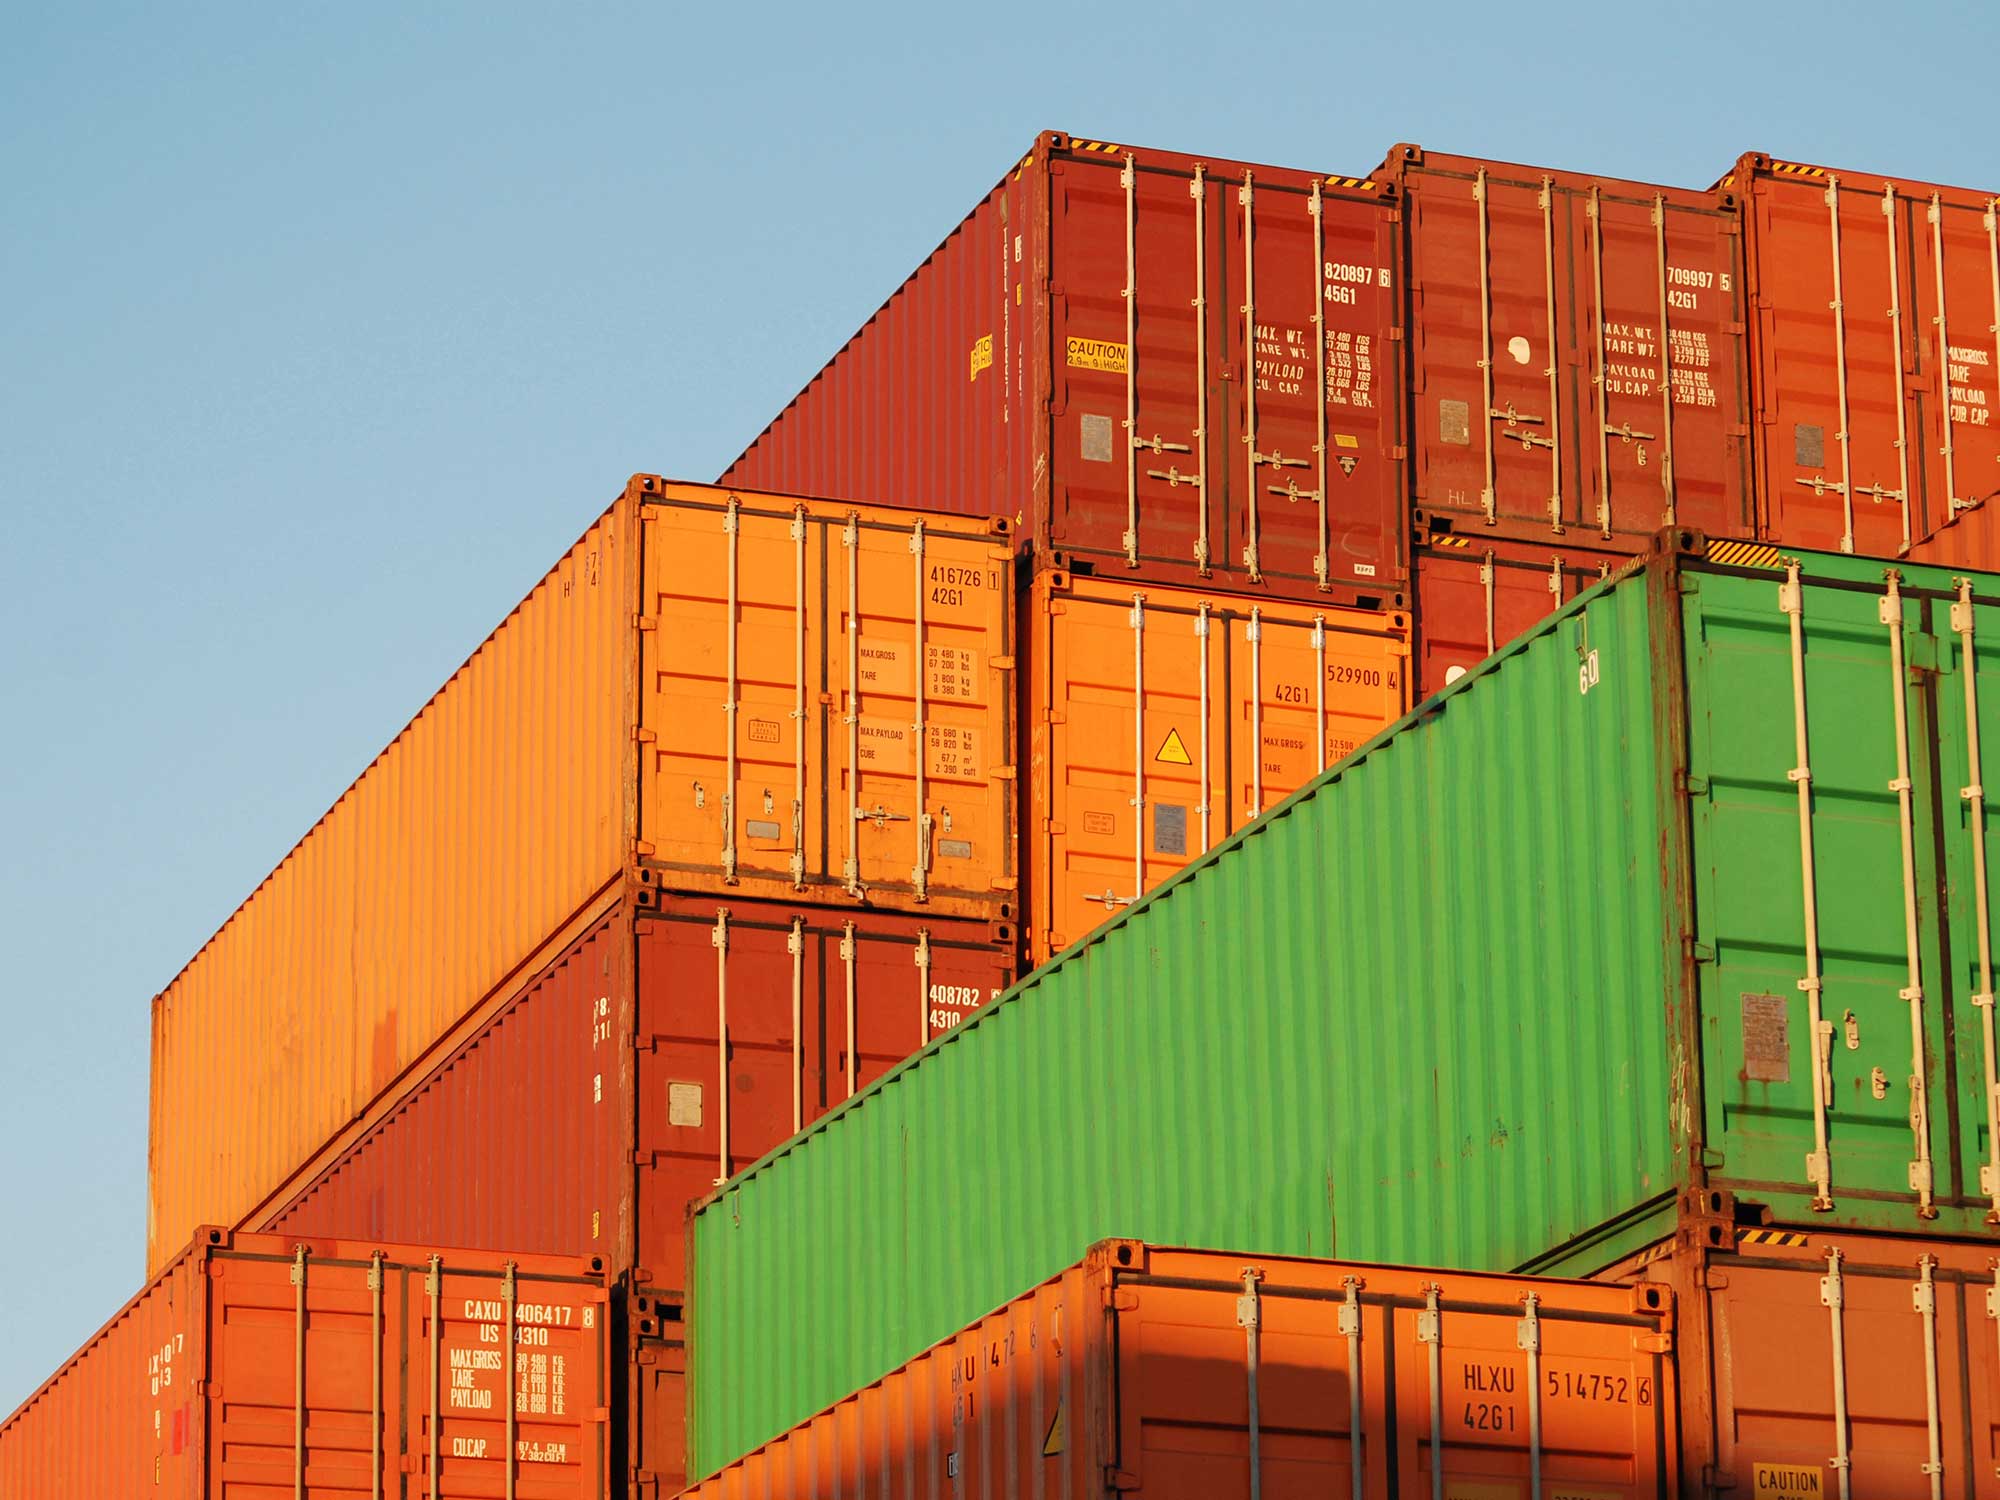 Something inside shipping containers is making workers sick